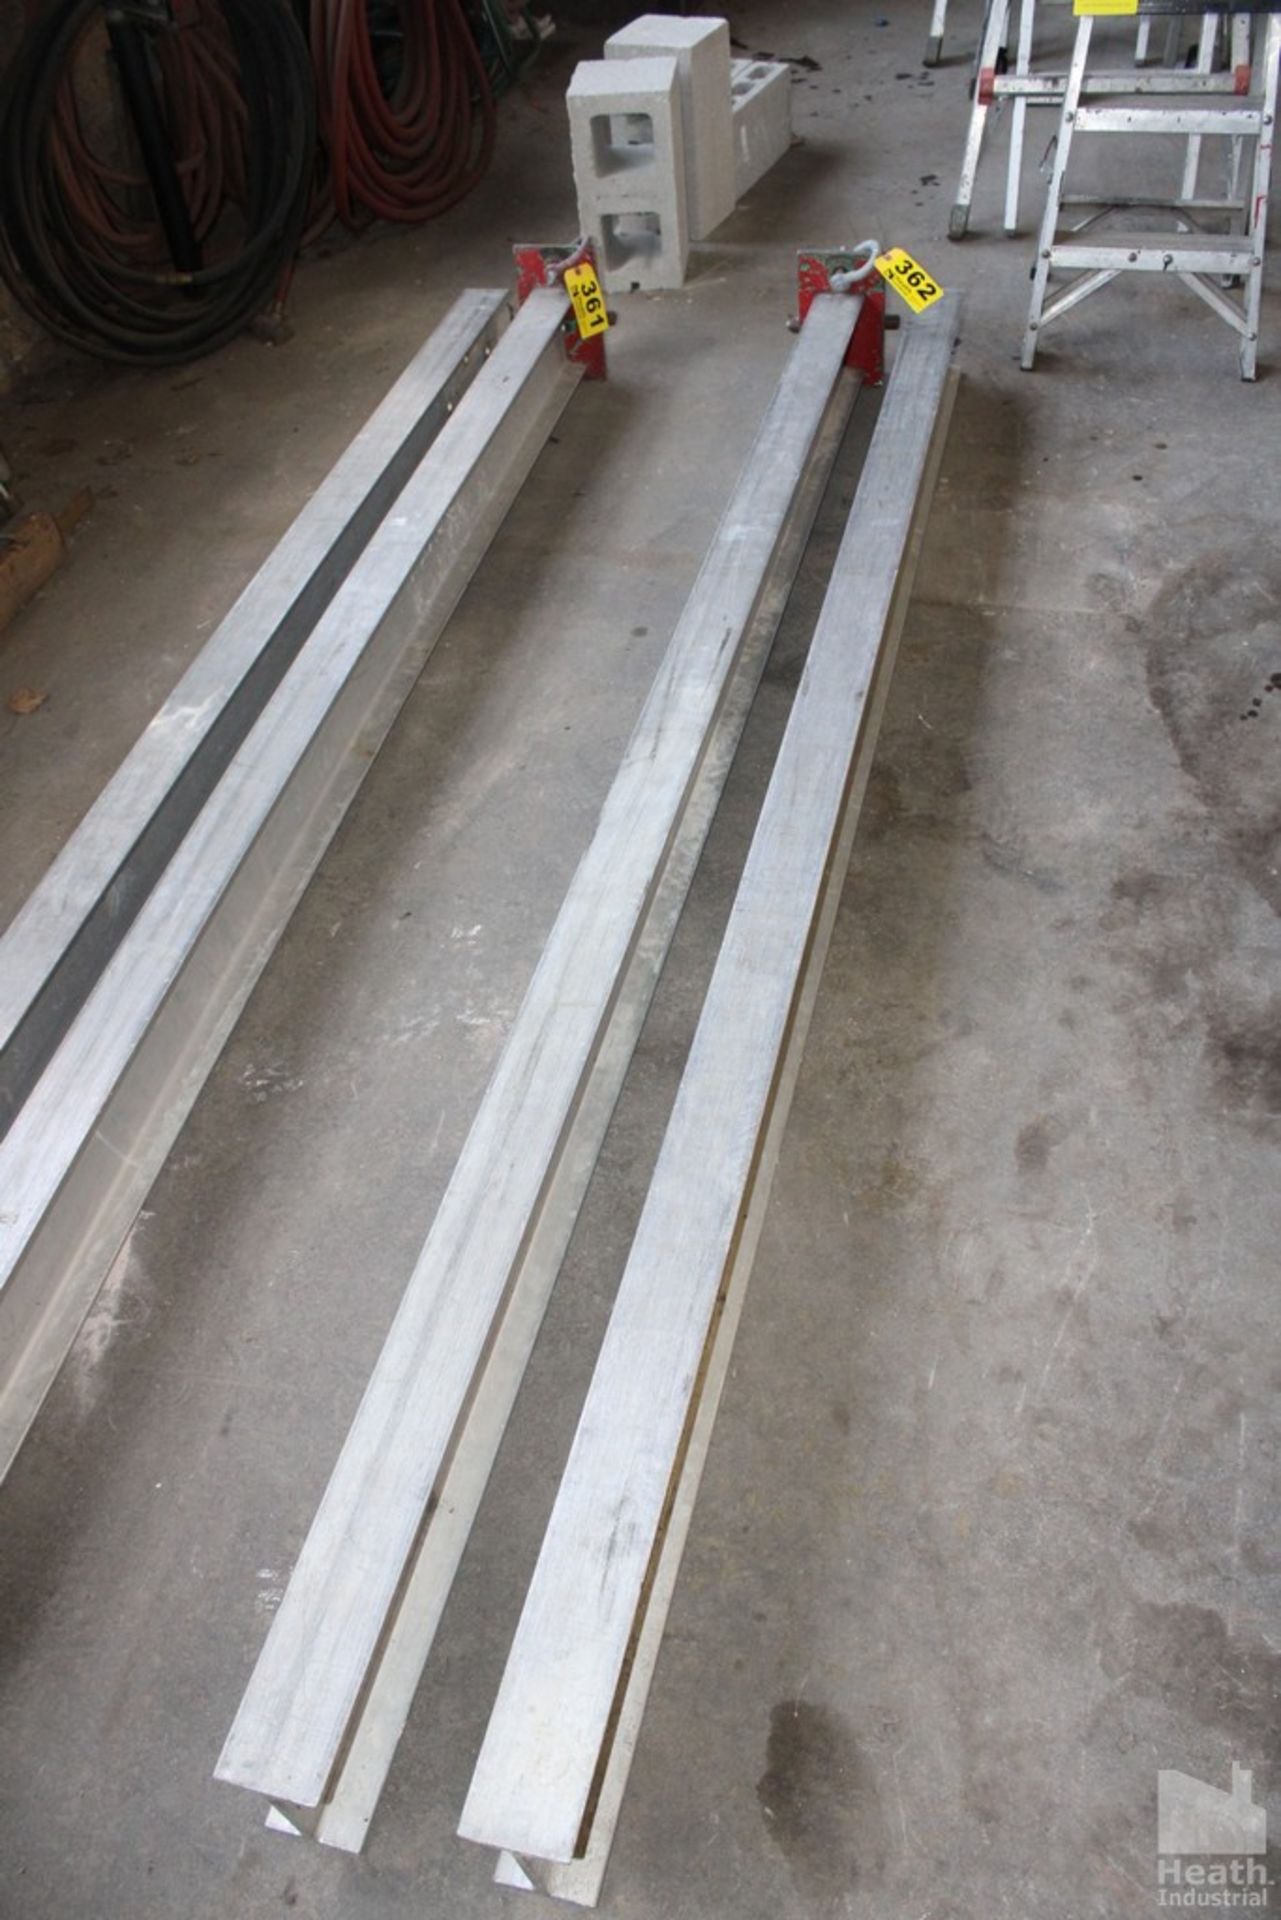 CANTILEVER ALUMINUM I-BEAMS, WITH COUNTER WEIGHTS, 100" EACH